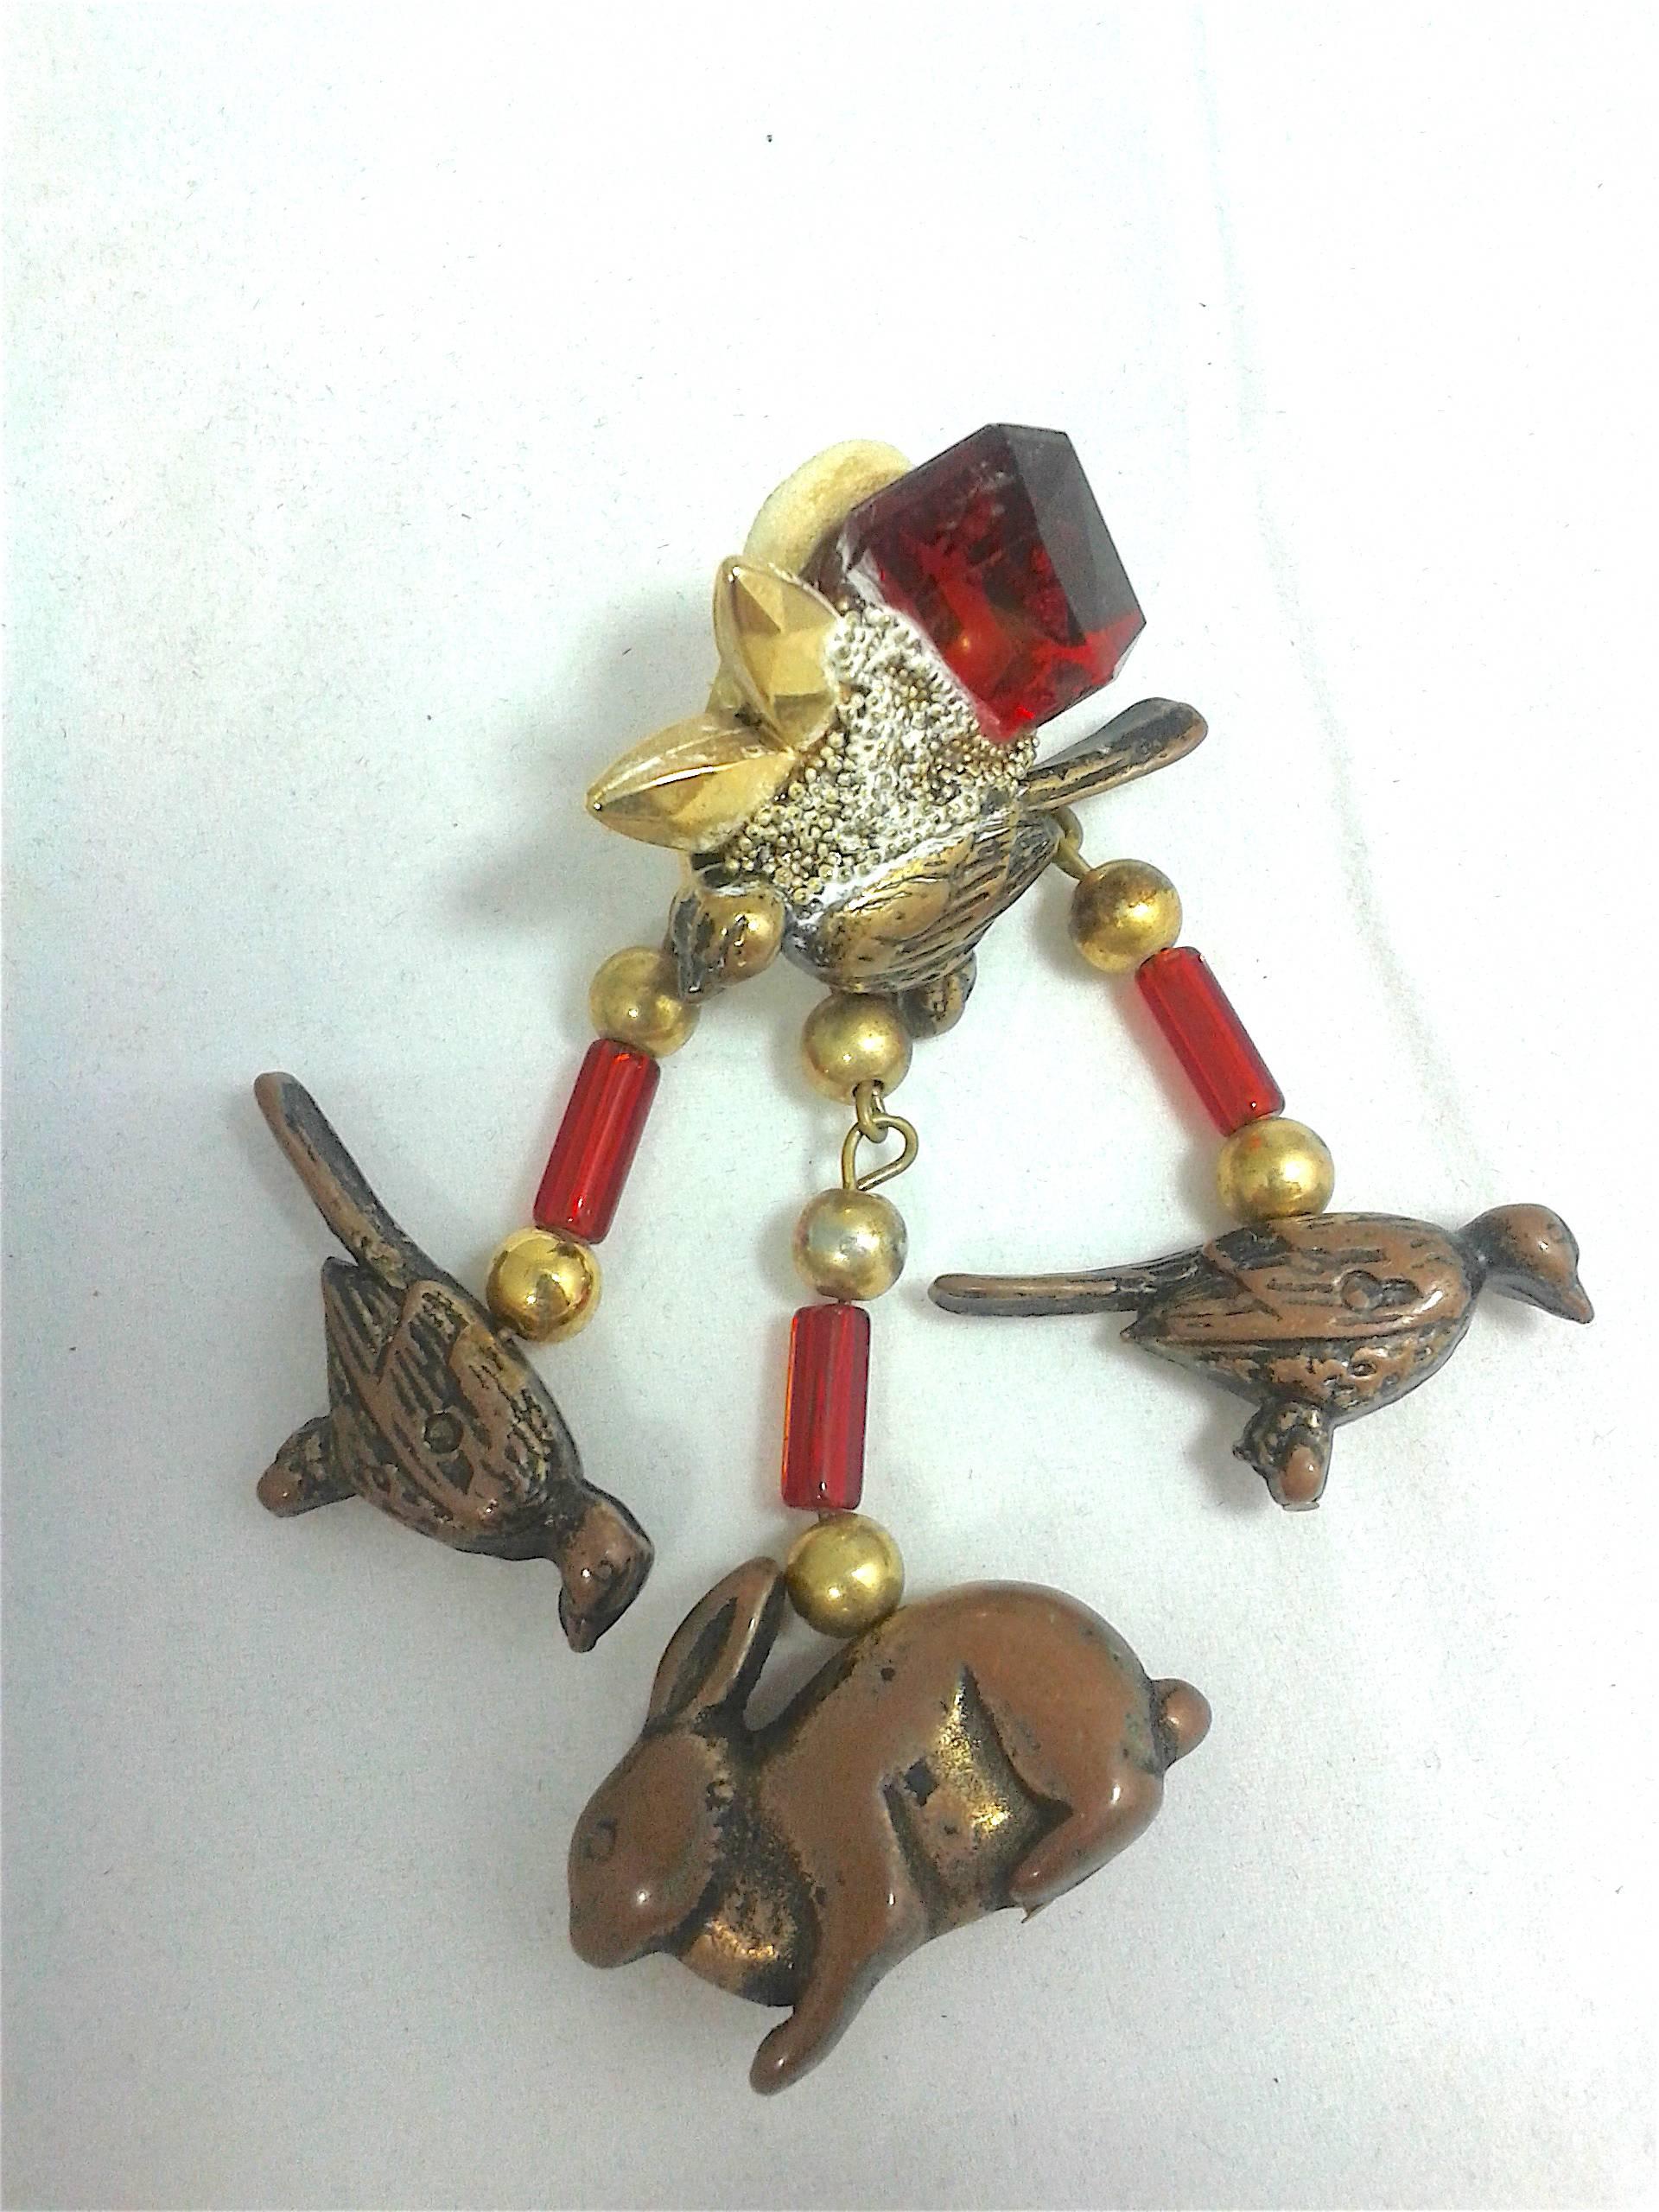 Charming 1950s Rabbit and Bird Cascade Earrings with Bakelite Chain In Excellent Condition For Sale In West Palm Beach, FL